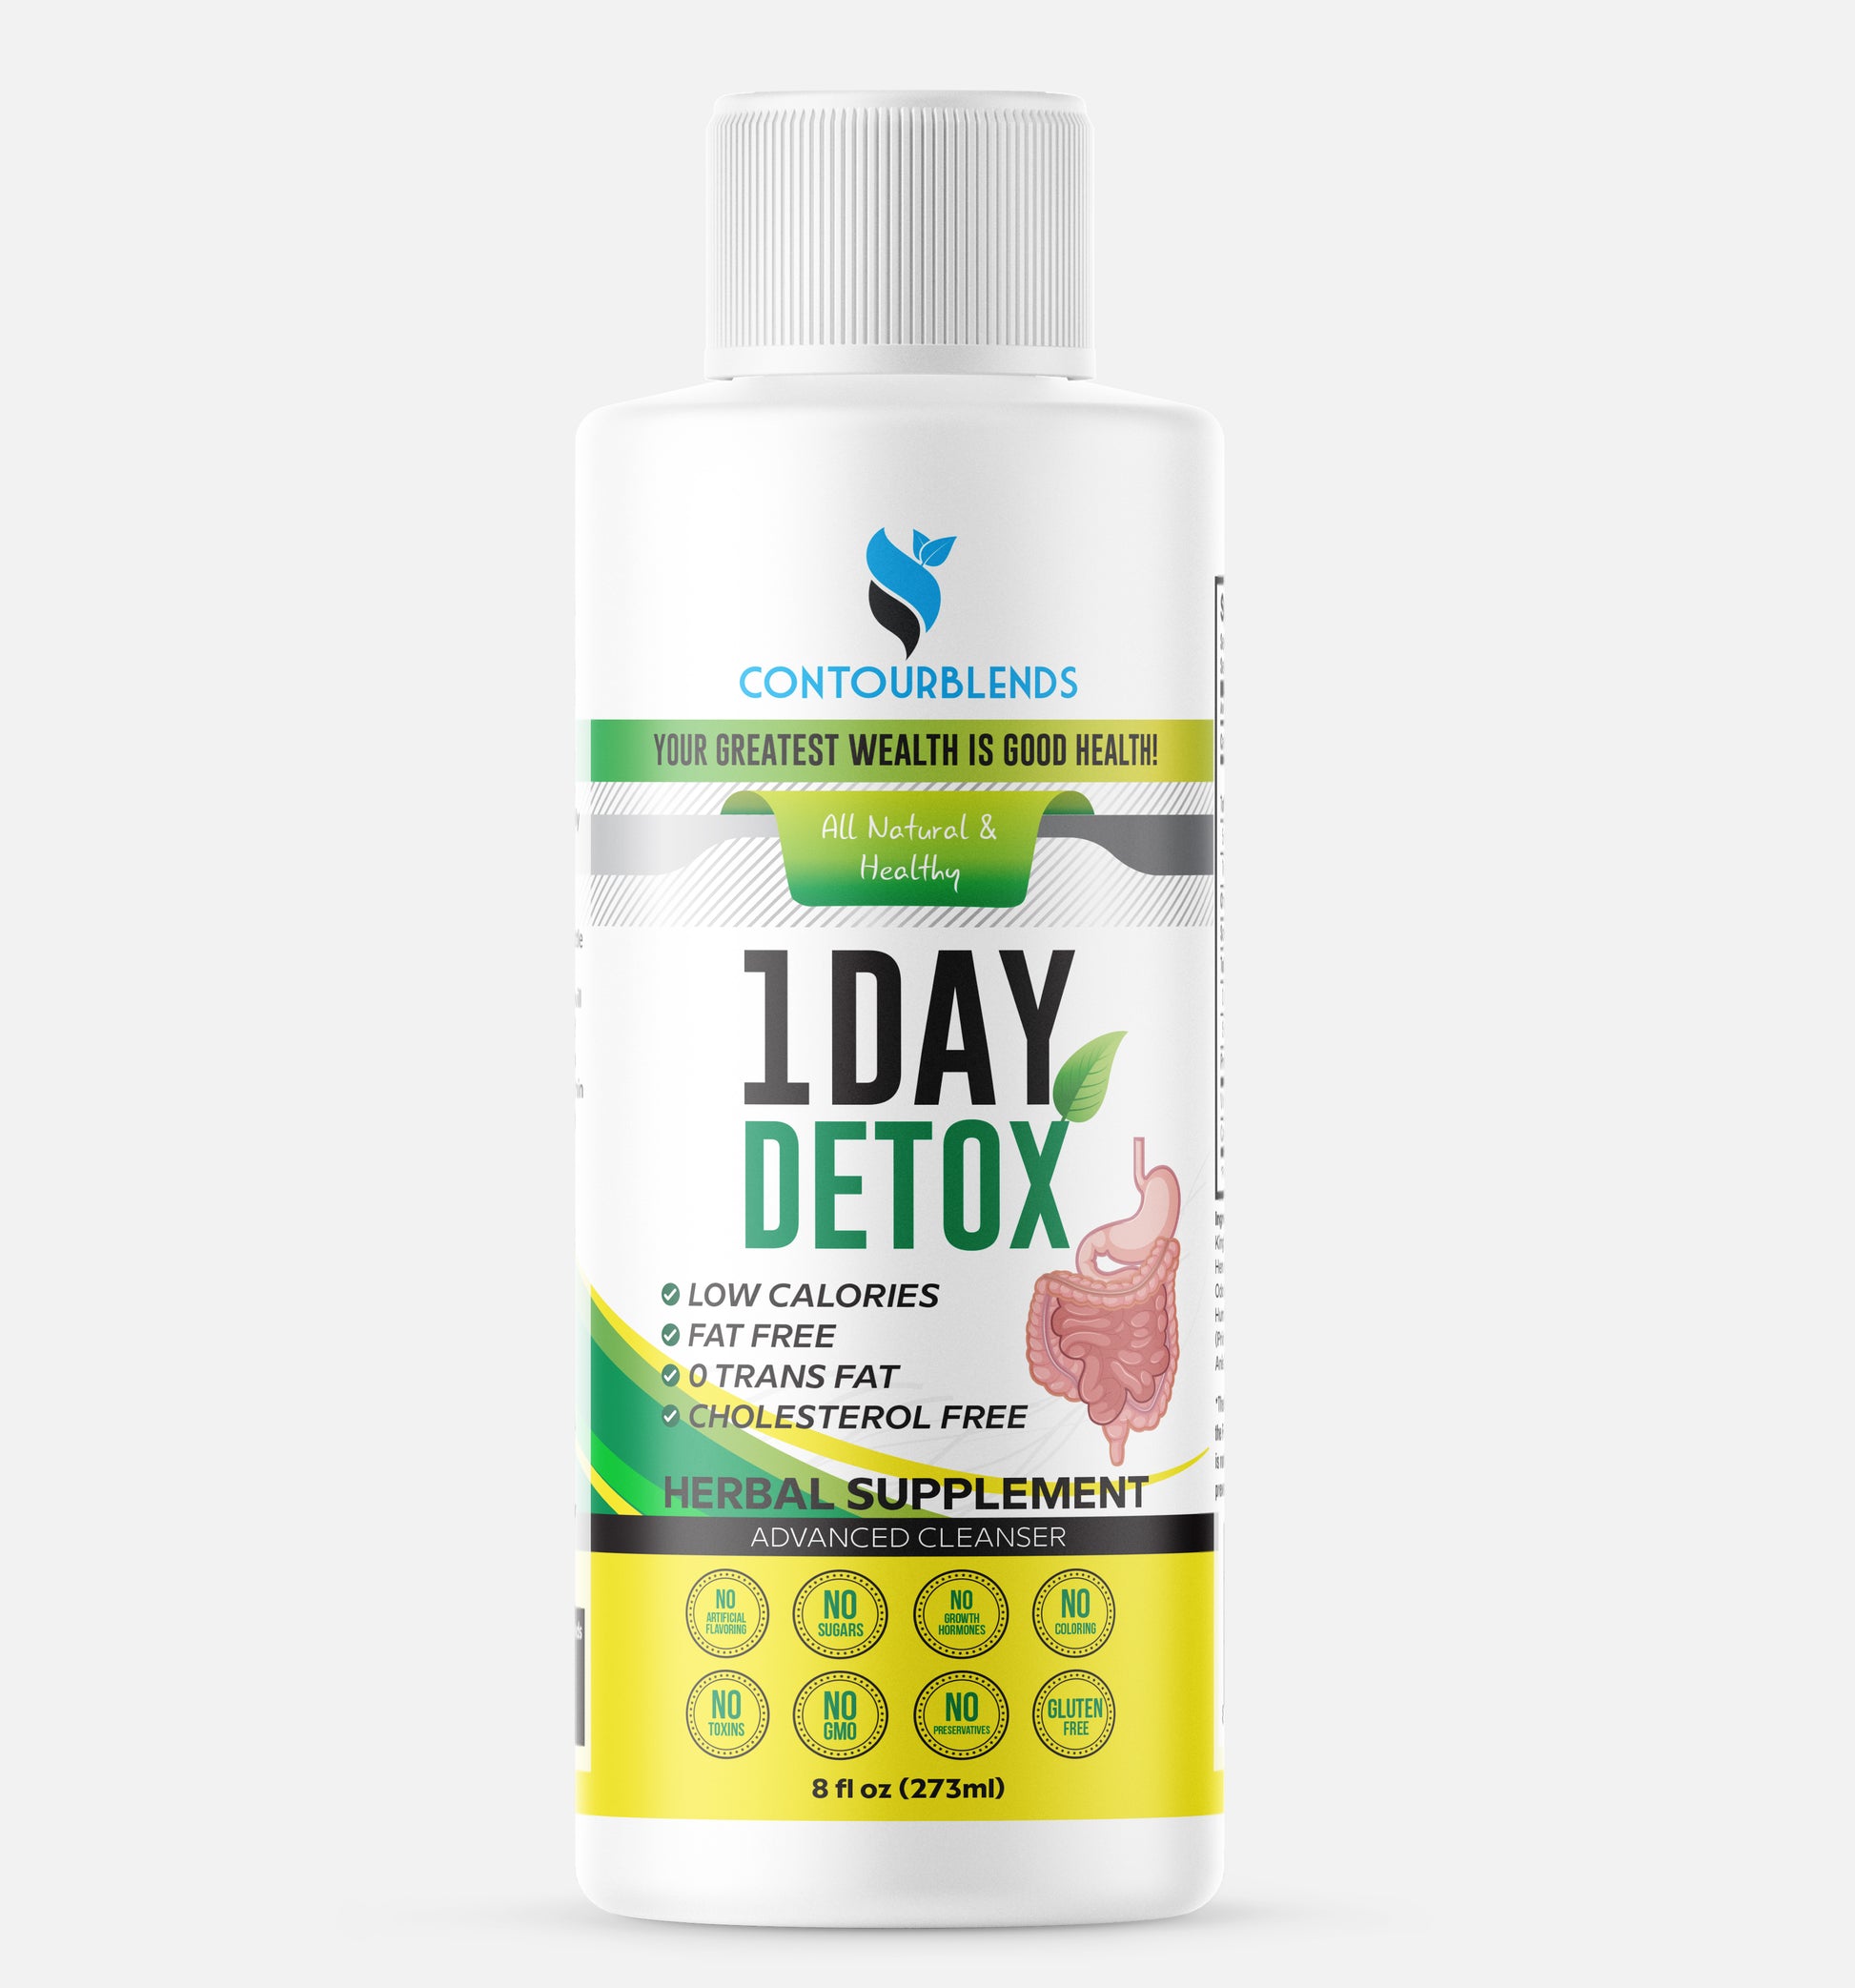 Same day detox cleanser in the USA